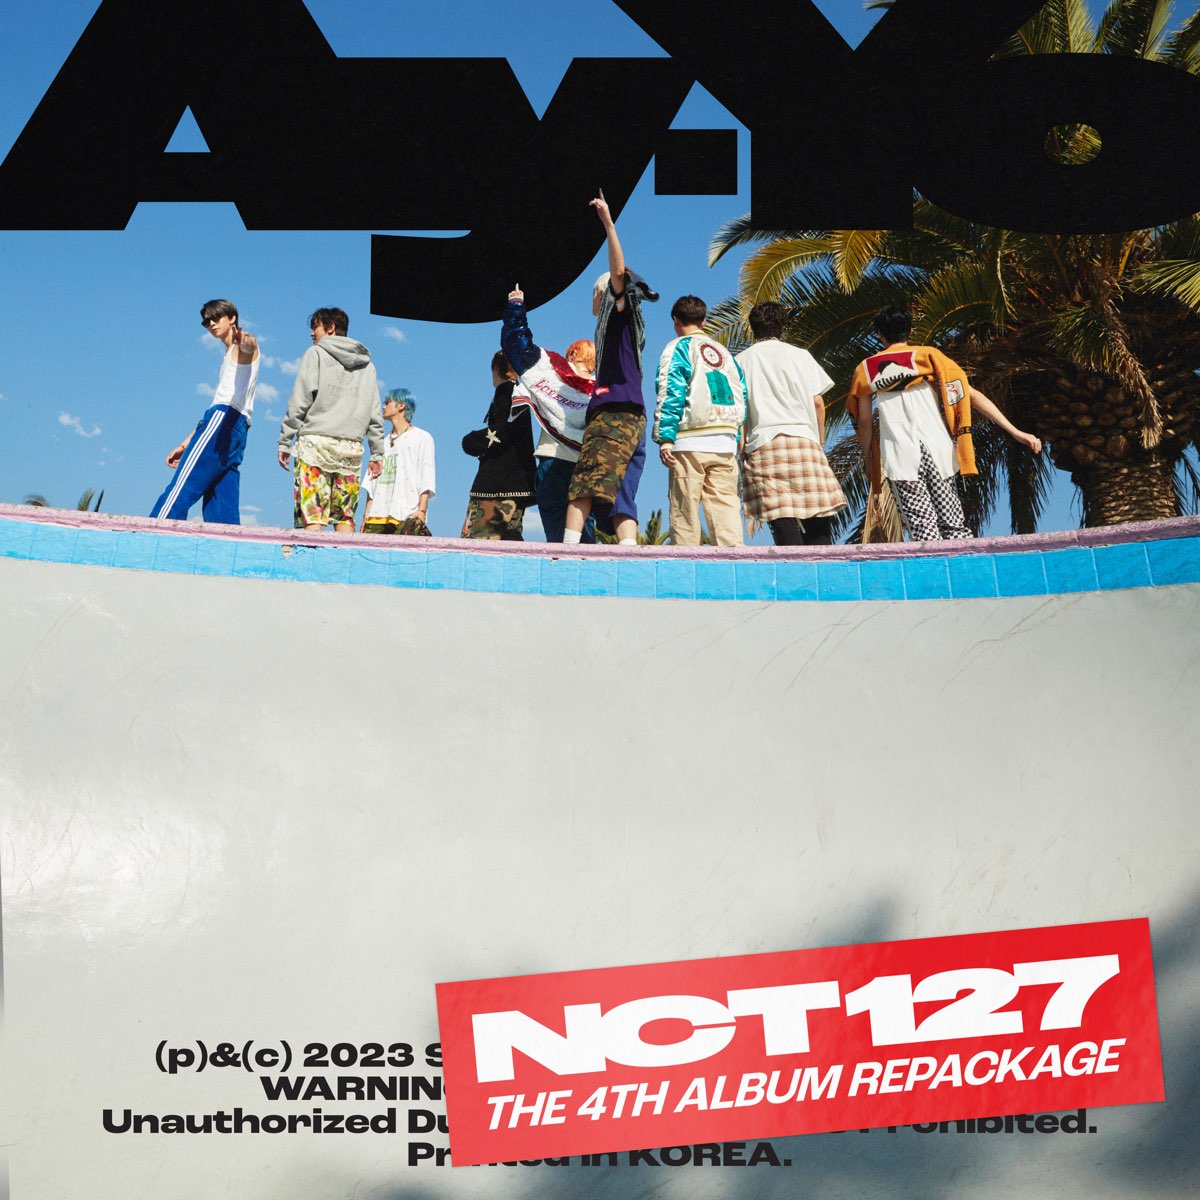 ‎Ay-Yo - The 4th Album Repackage by NCT 127 on Apple Music